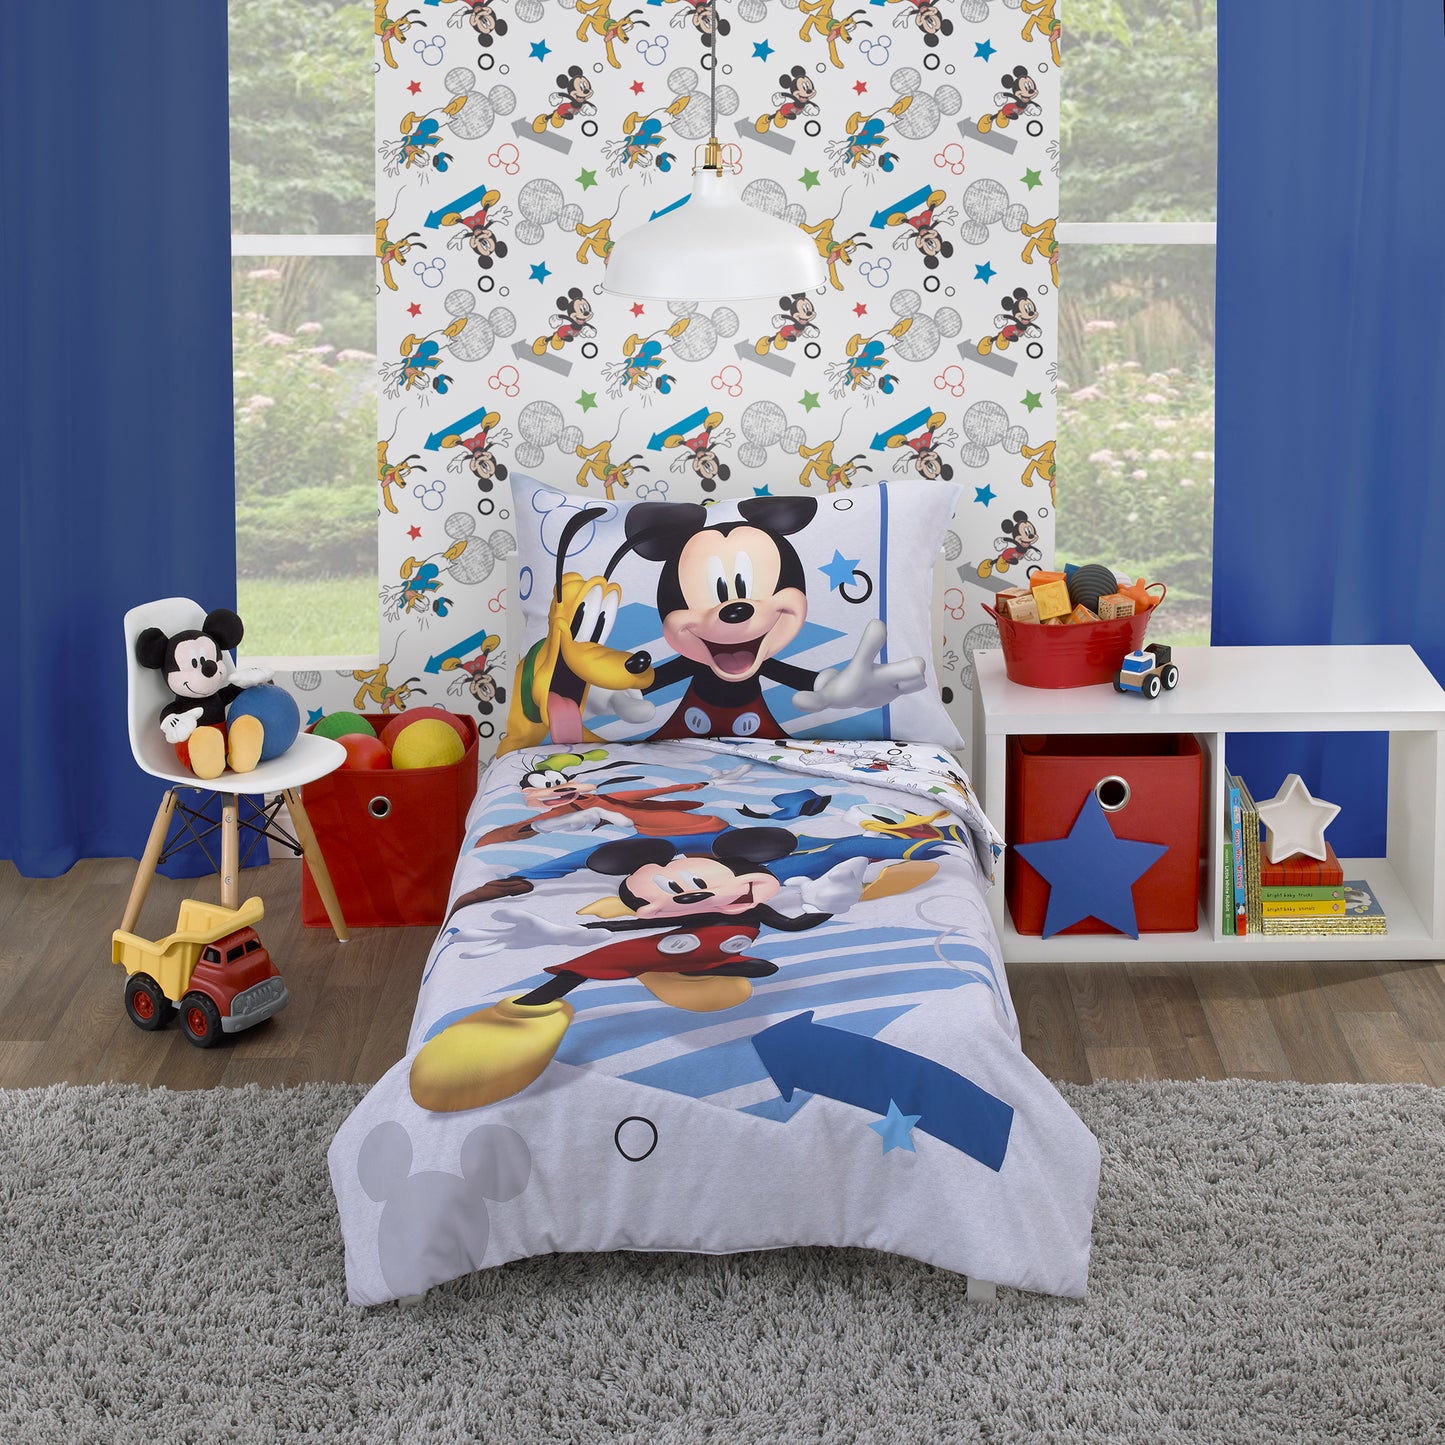 Disney Mickey Mouse Clubhouse Buddies Multi Colored Goofy, Pluto, and Donald Duck 4 Piece Toddler Bed Set - Comforter, Fitted Bottom Sheet, Flat Top Sheet, and Reversible Pillowcase